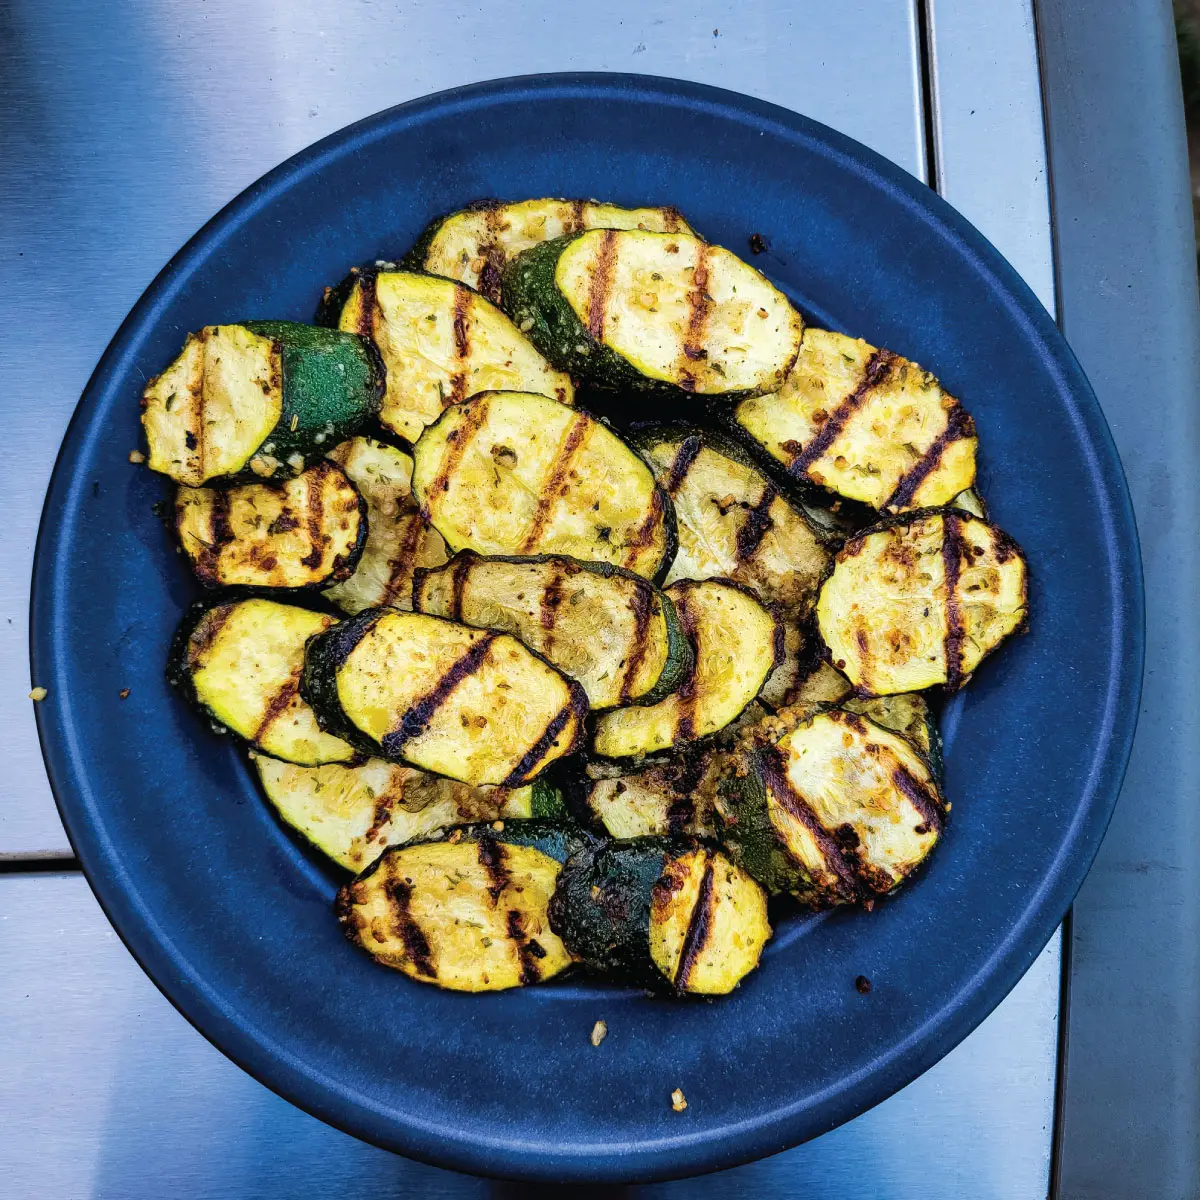 Zucchini slices on a plate ready to be served after being grilled.